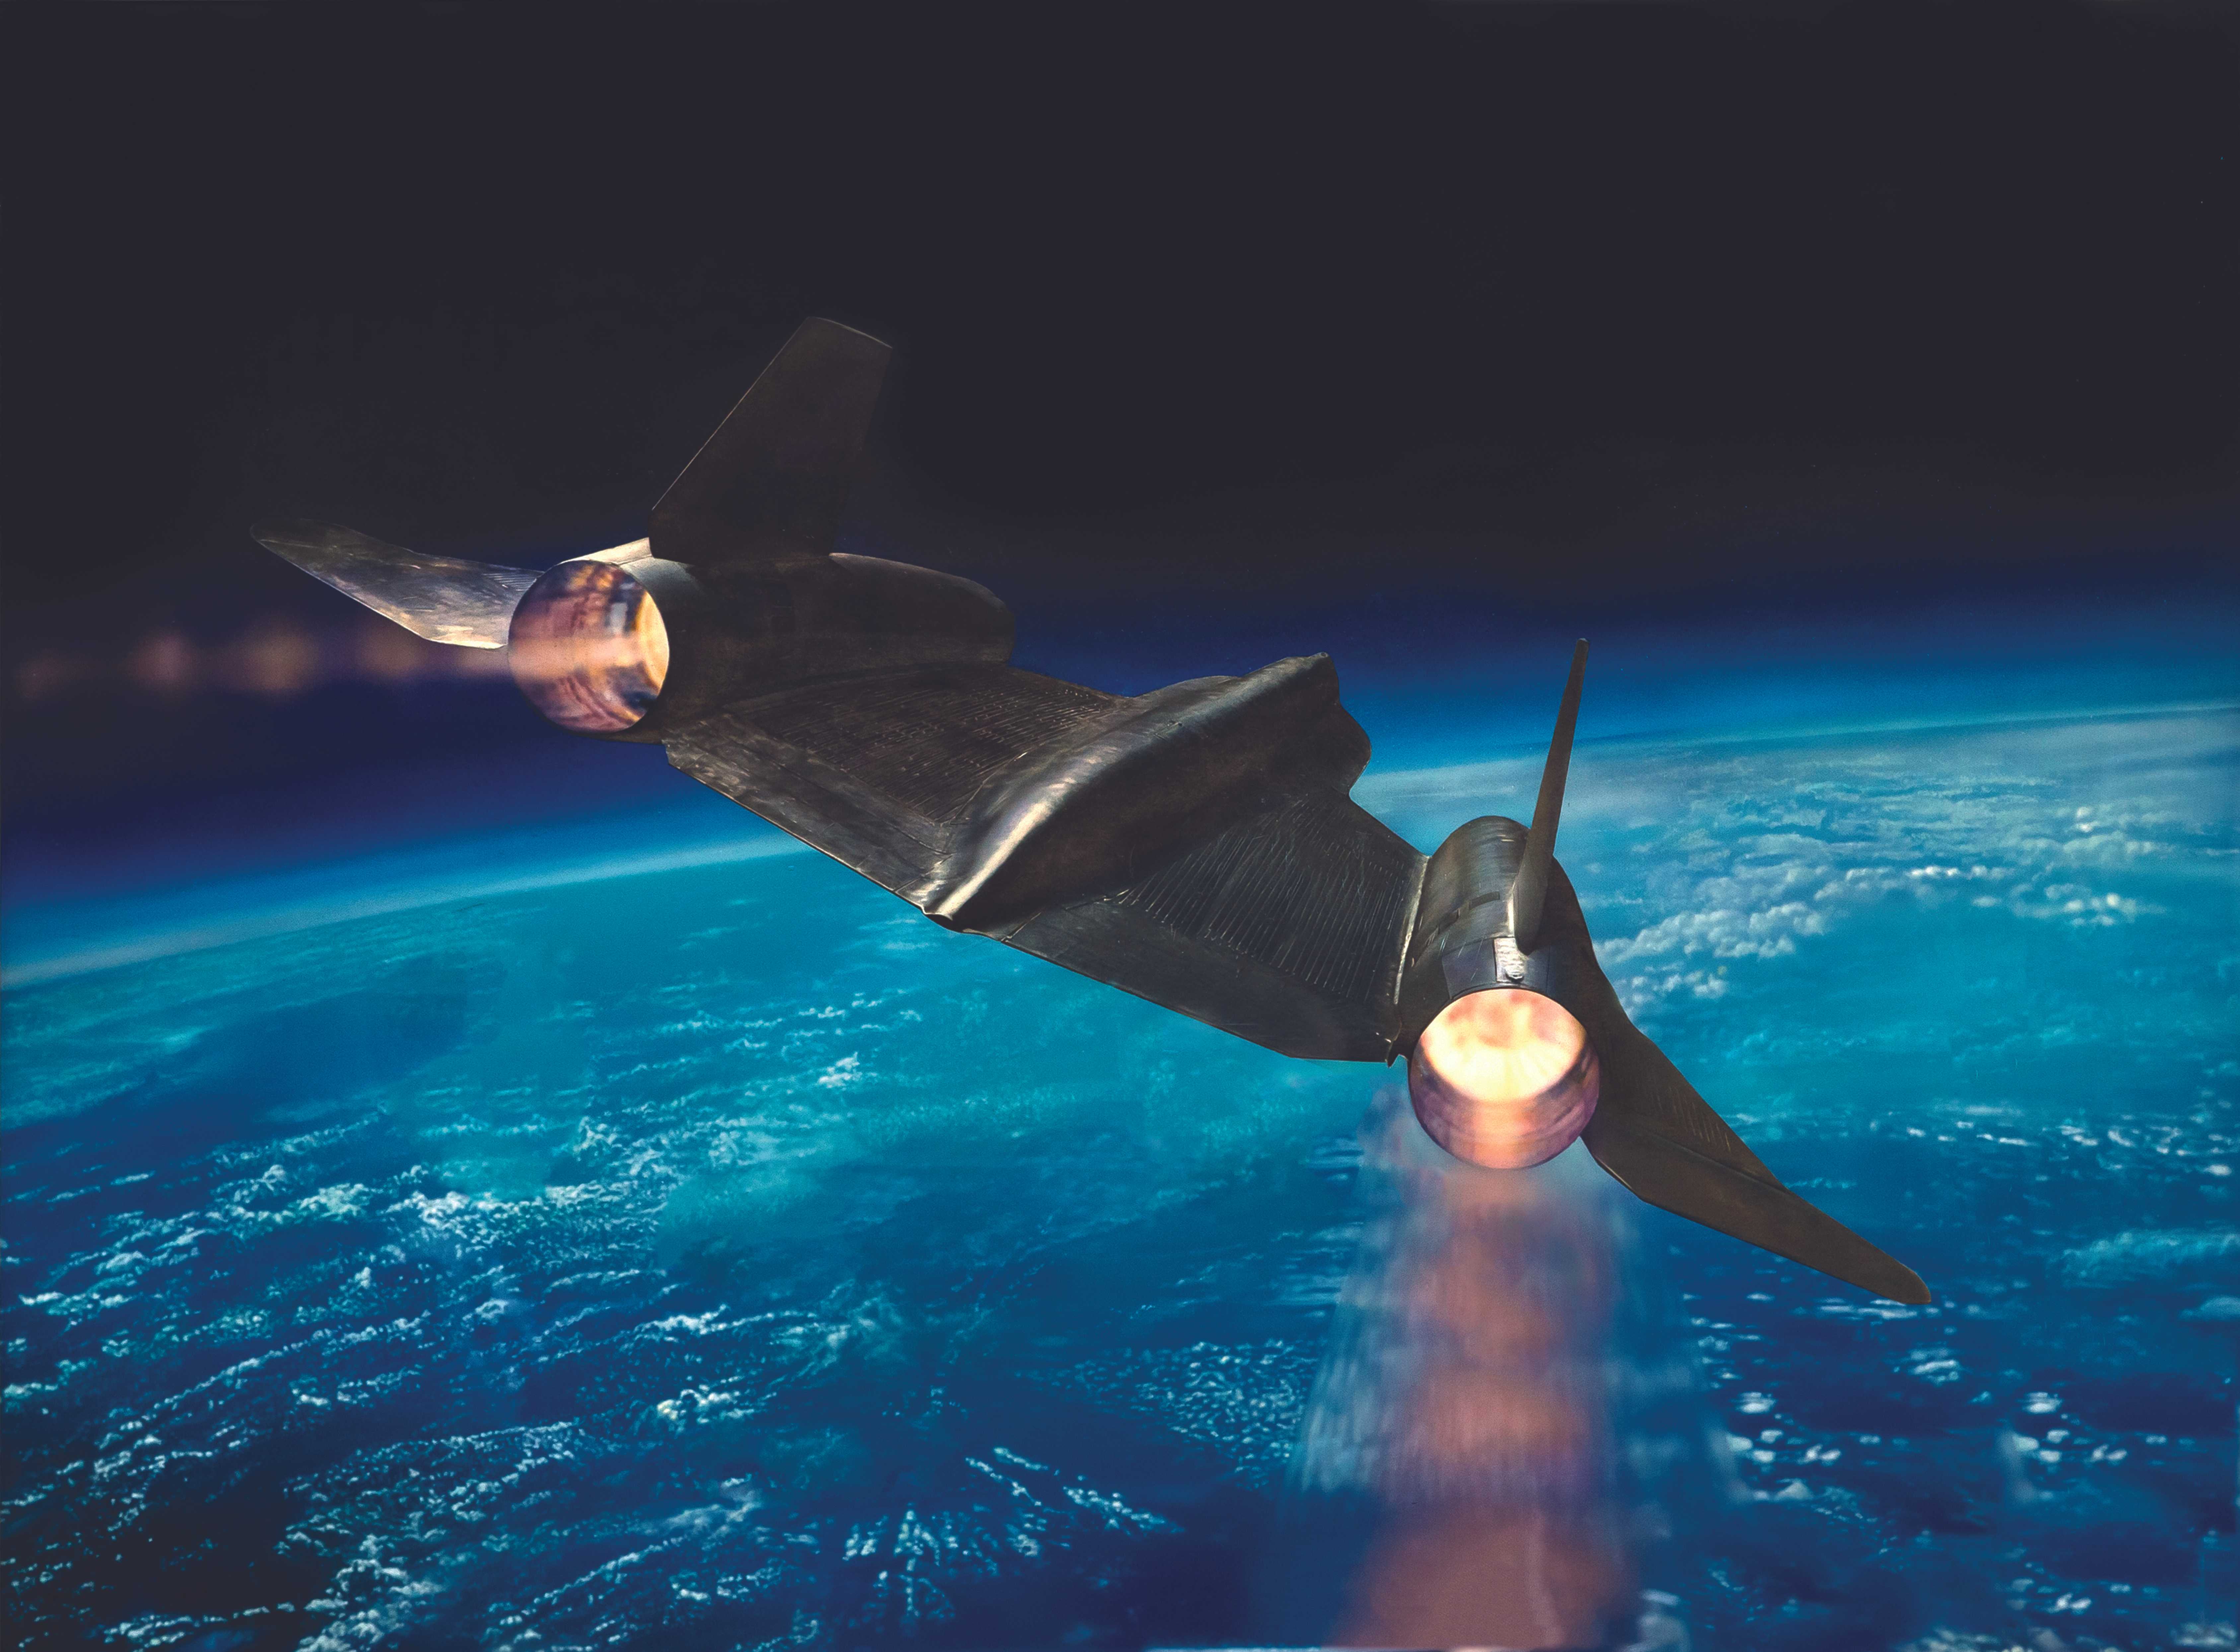 An illustration of the A-12 in flight.